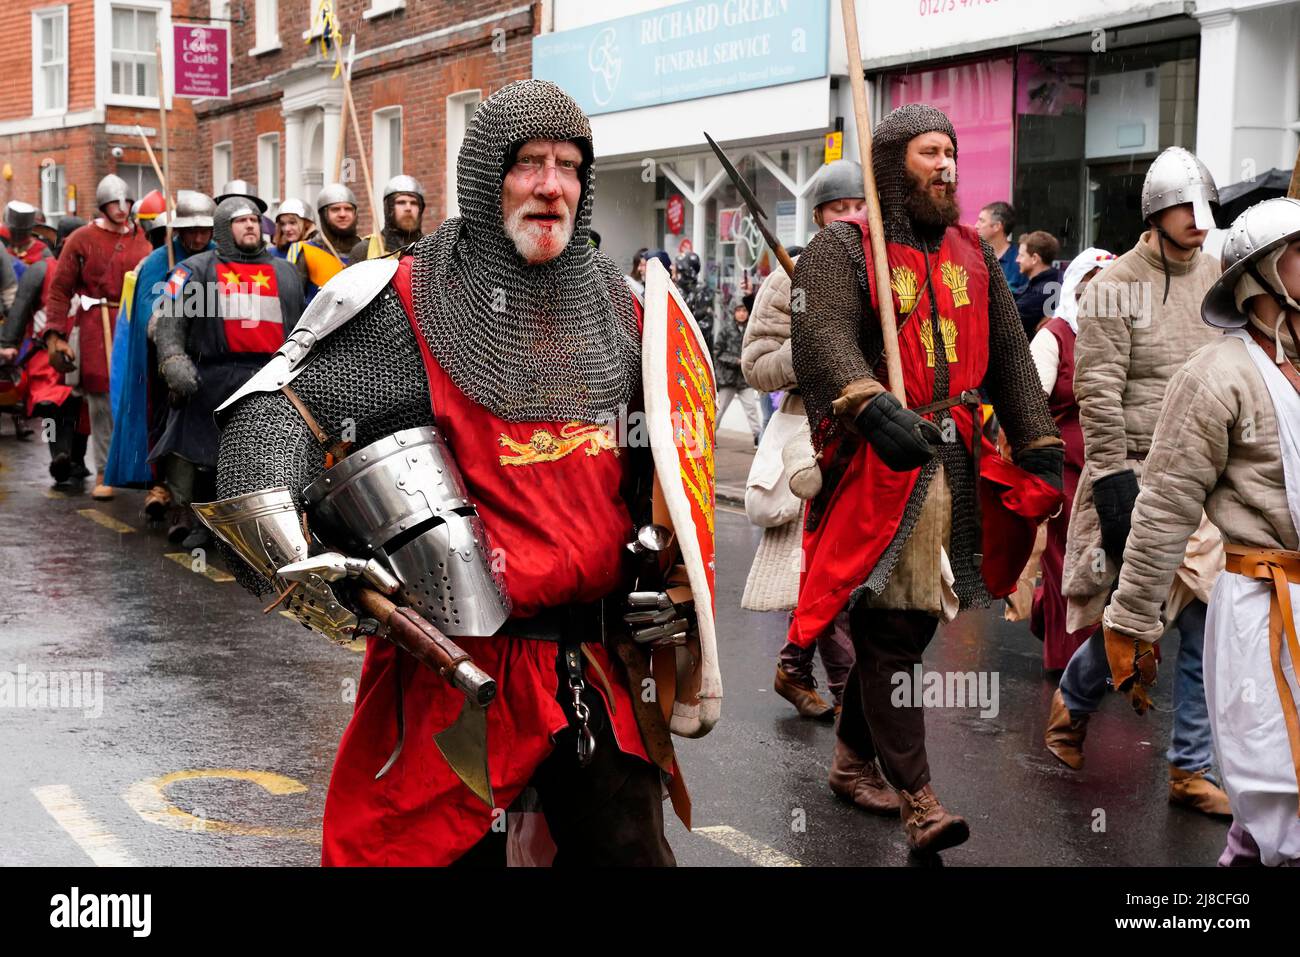 Lewes, UK. 15th May 2022. People in medieval costume re-enact the historic 1264 Battle of Lewes by marching through the streets and taking part in mock battles at various points throughout the town. Grant Rooney/Alamy Live News Stock Photo